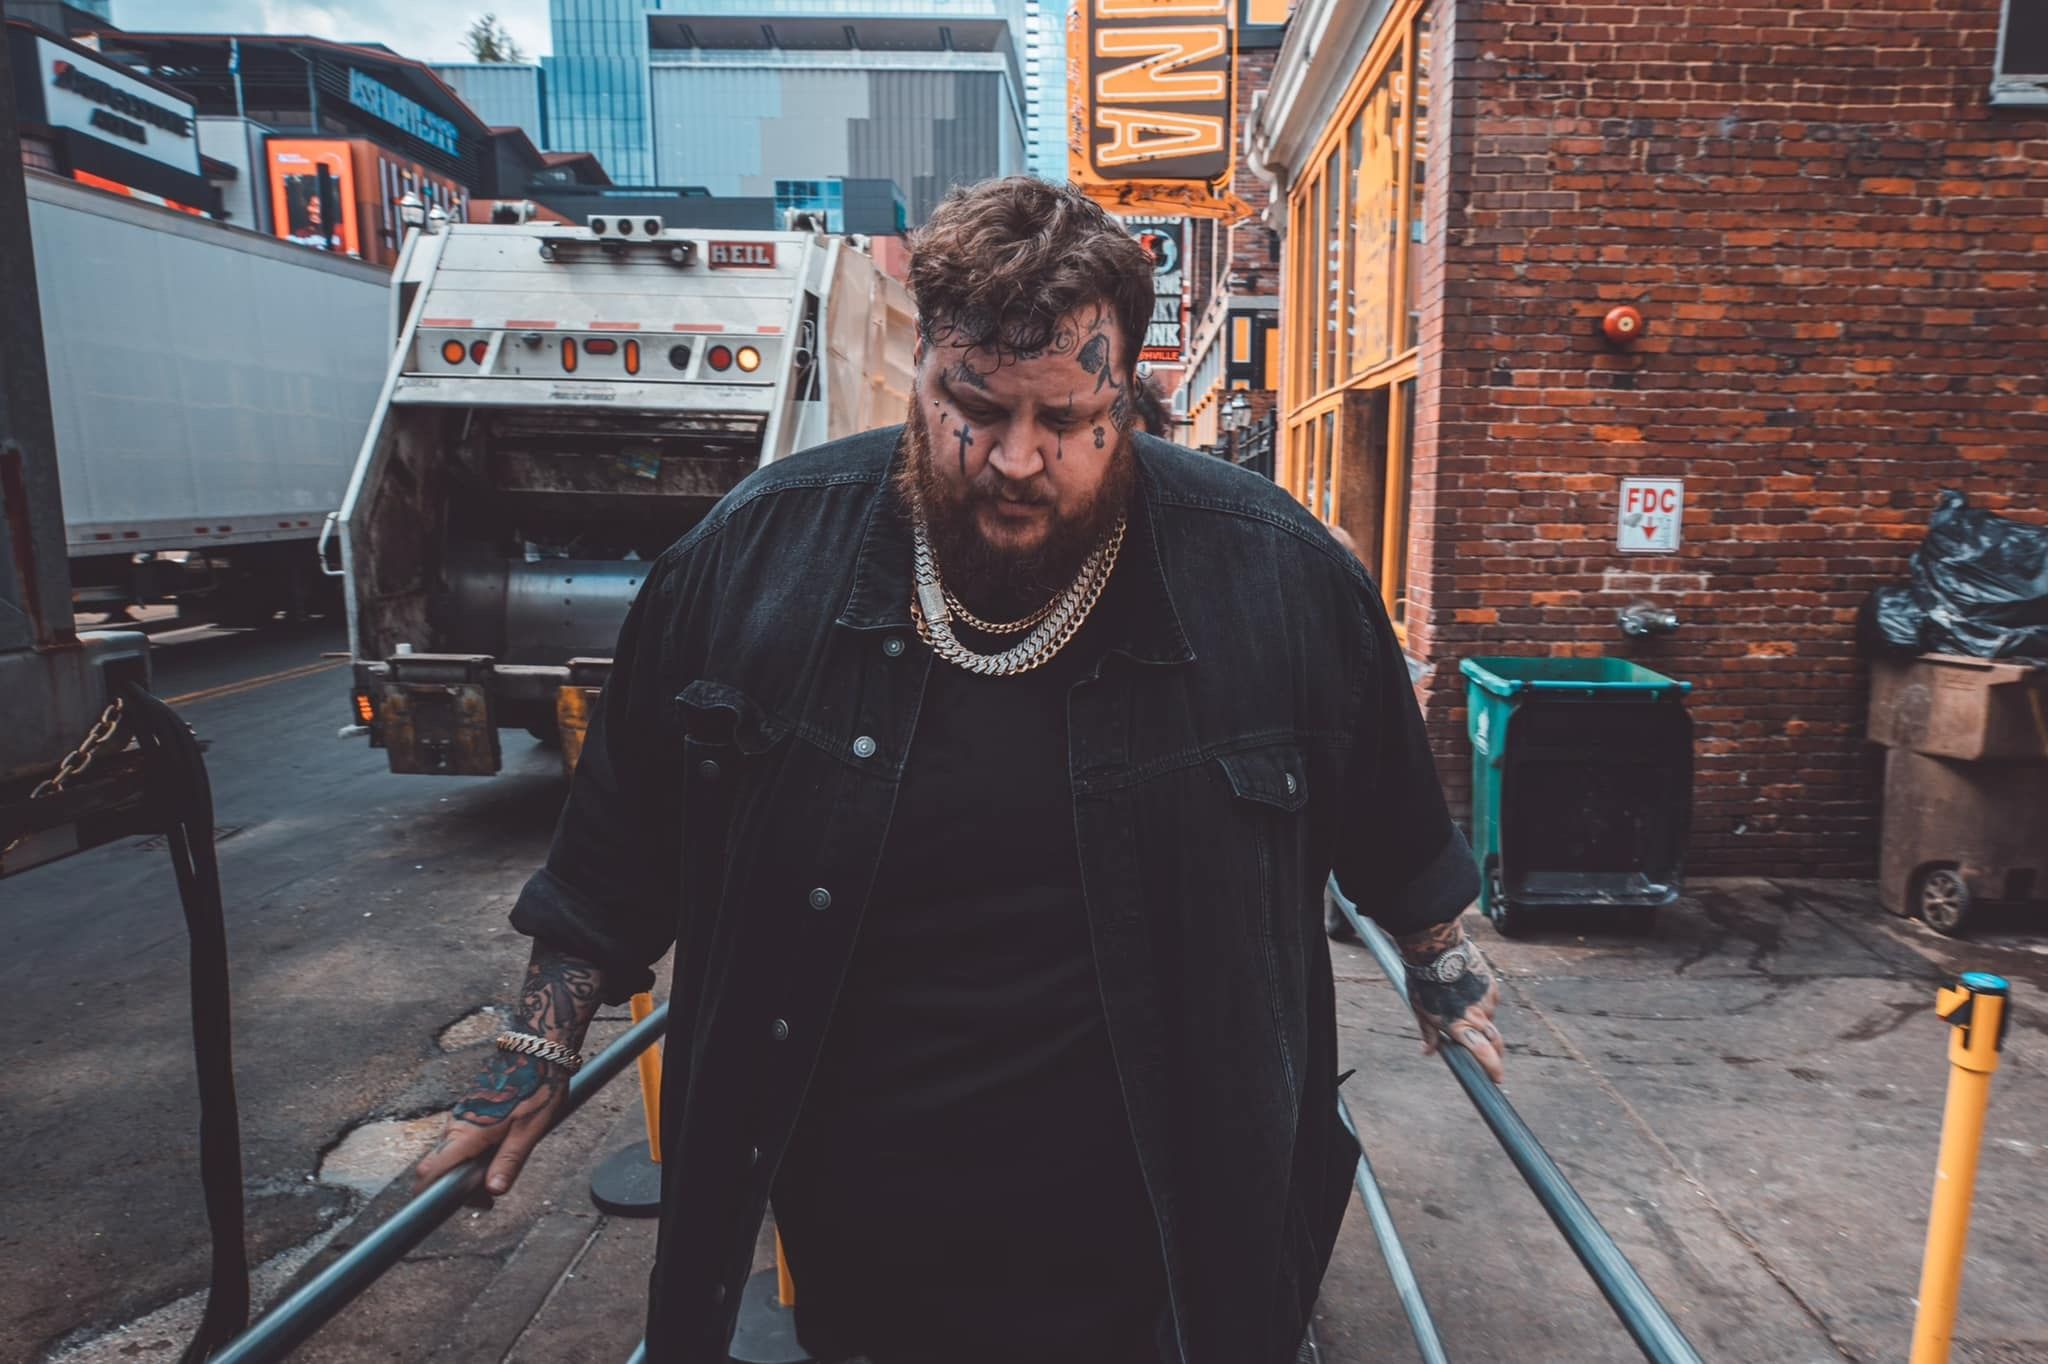 Jelly Roll Brings Fans Behind the Scenes with Hulu Documentary